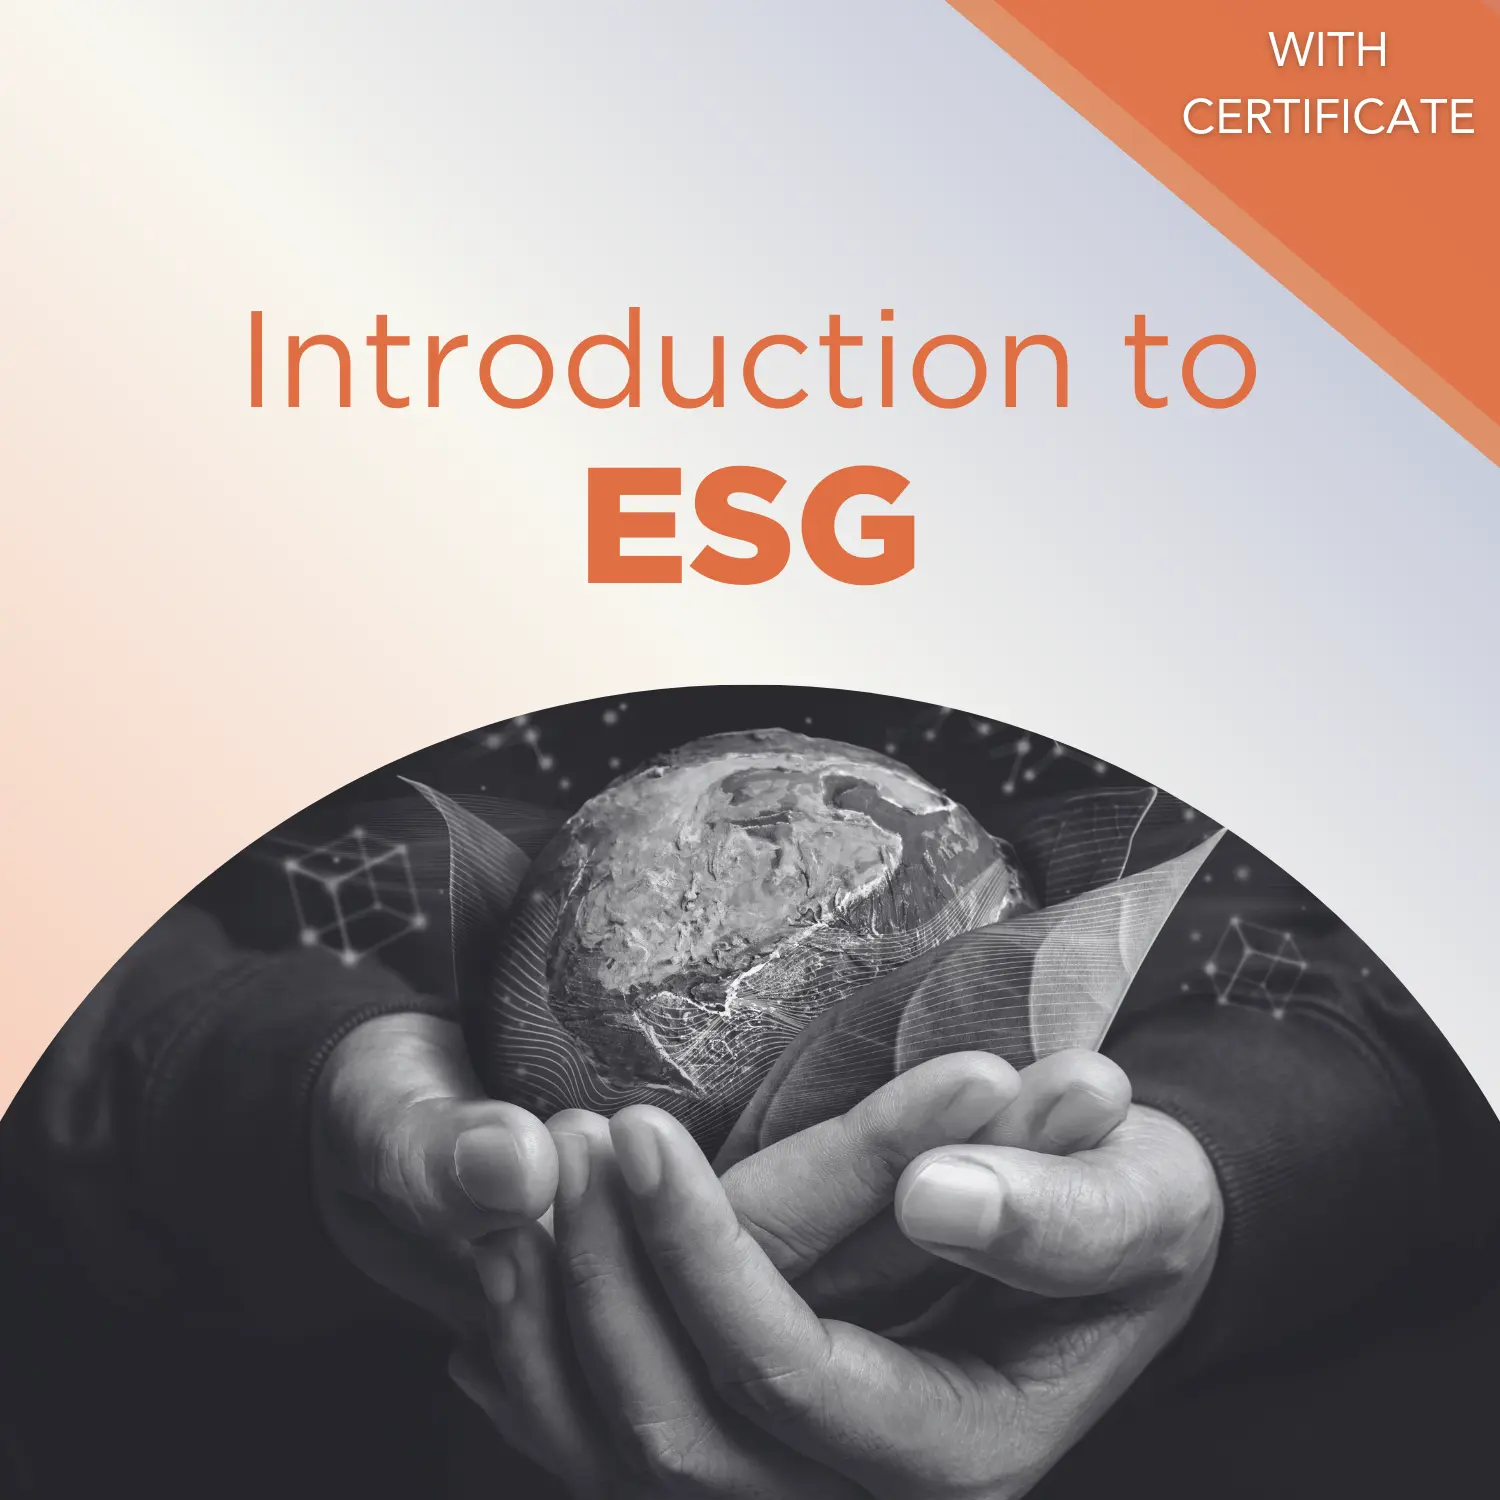 Introduction to<br />
ESG